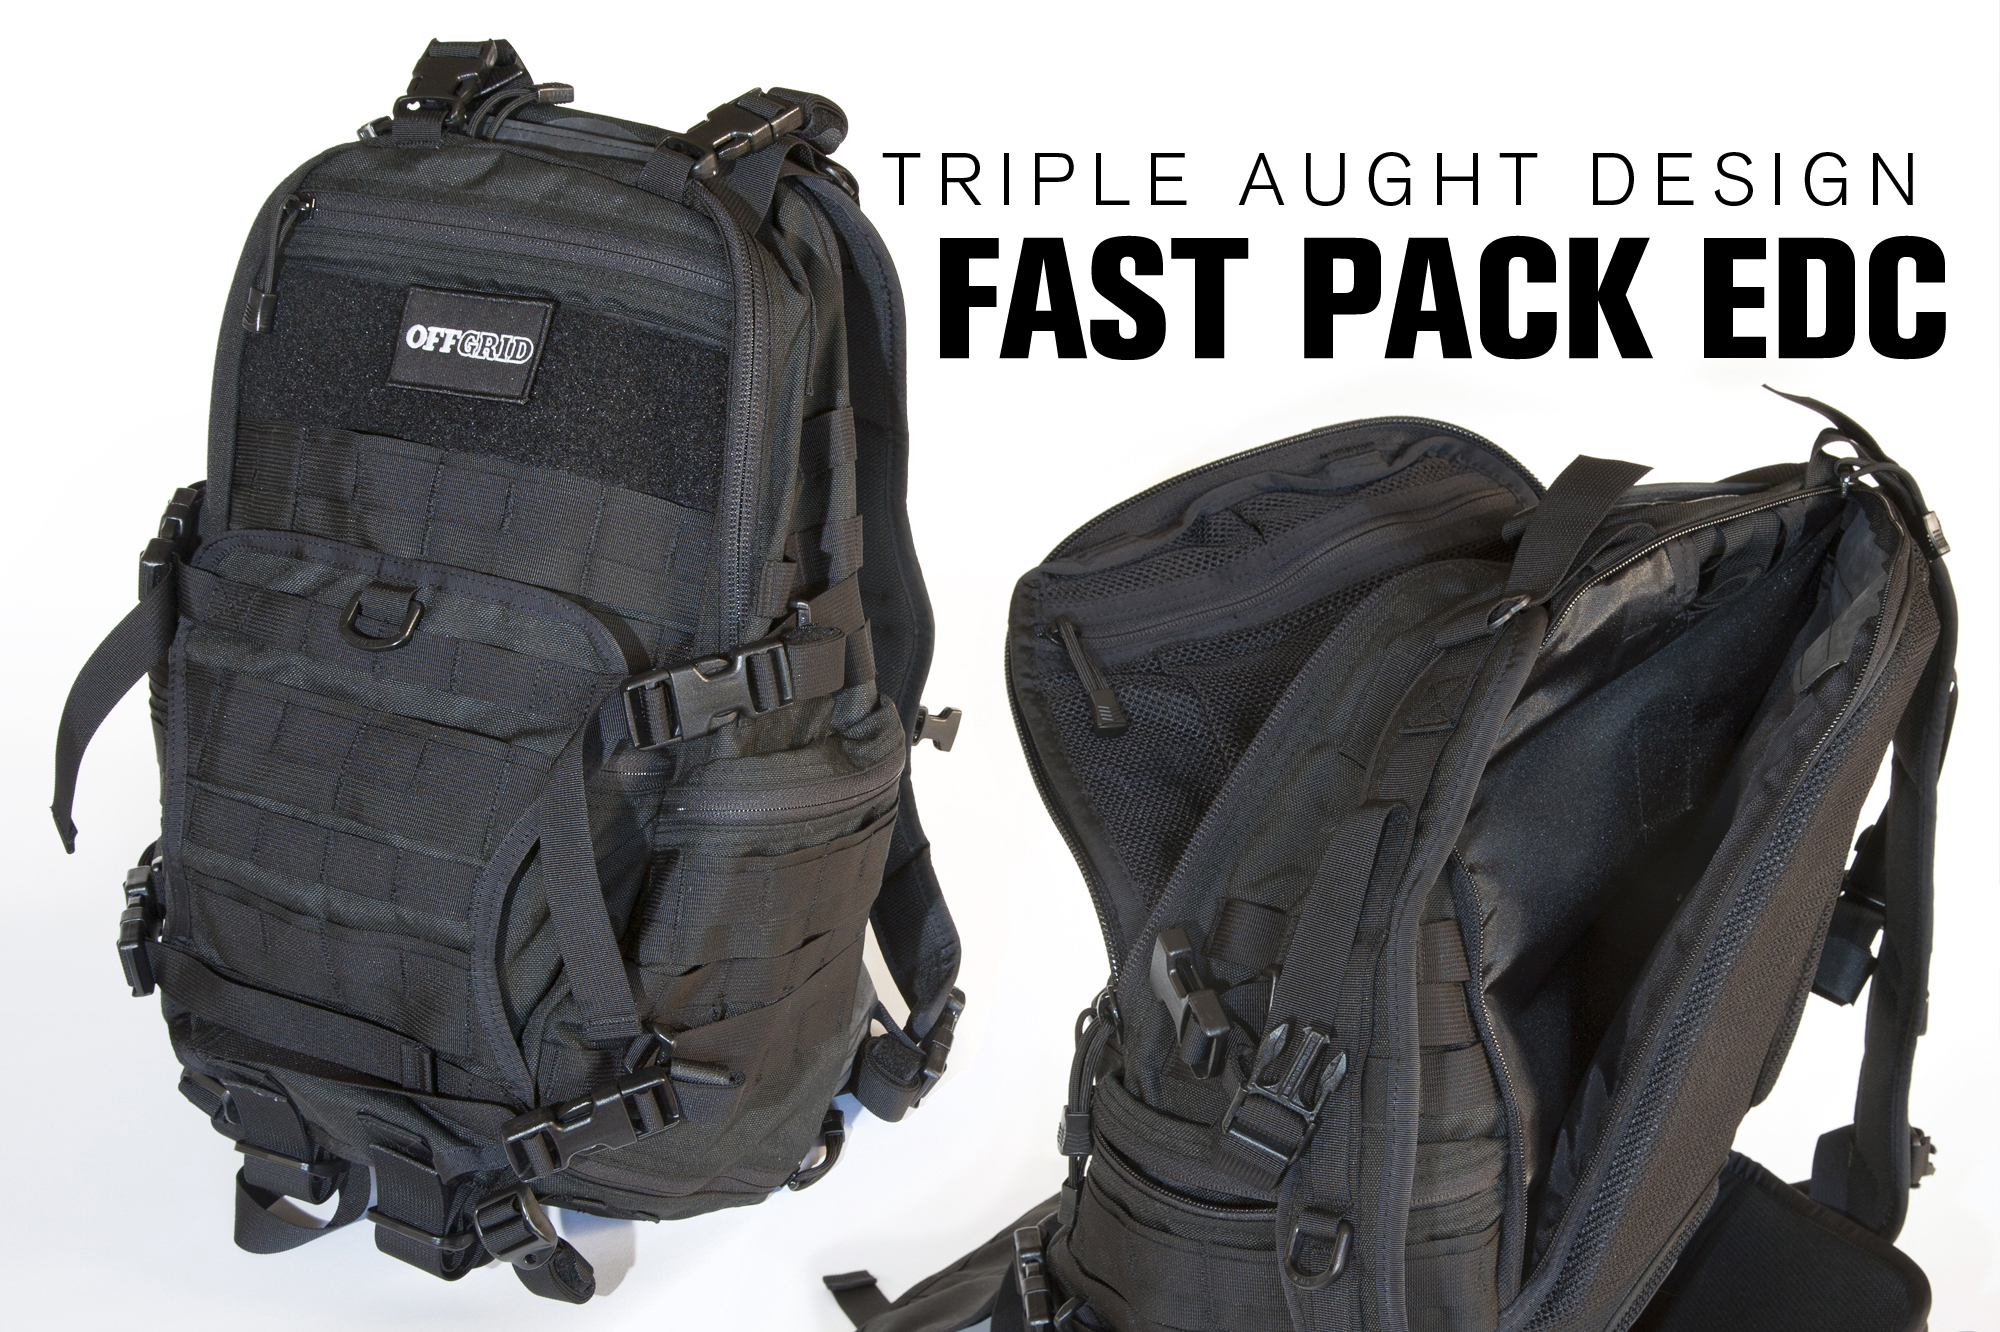 FAST Pack EDC Review | RECOIL OFFGRID